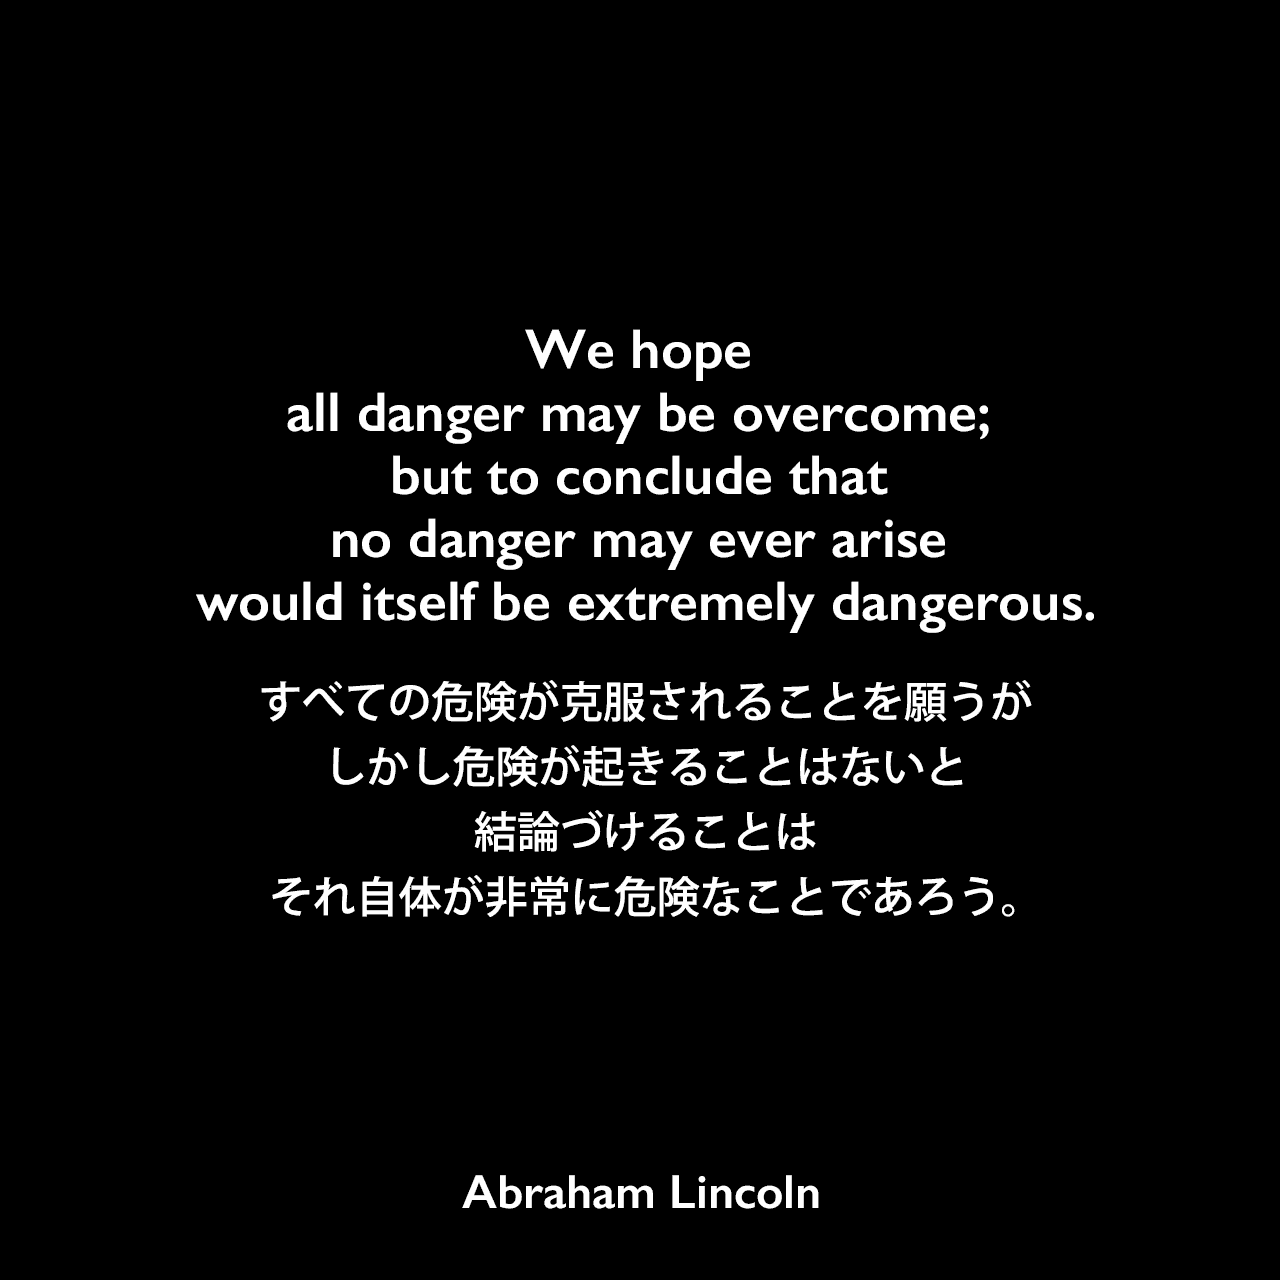 We hope all danger may be overcome; but to conclude that no danger may ever arise would itself be extremely dangerous.すべての危険が克服されることを願うが、しかし危険が起きることはないと結論づけることは、それ自体が非常に危険なことであろう。- イリノイ州スプリングフィールドでのスピーチ（1838年）よりAbraham Lincoln